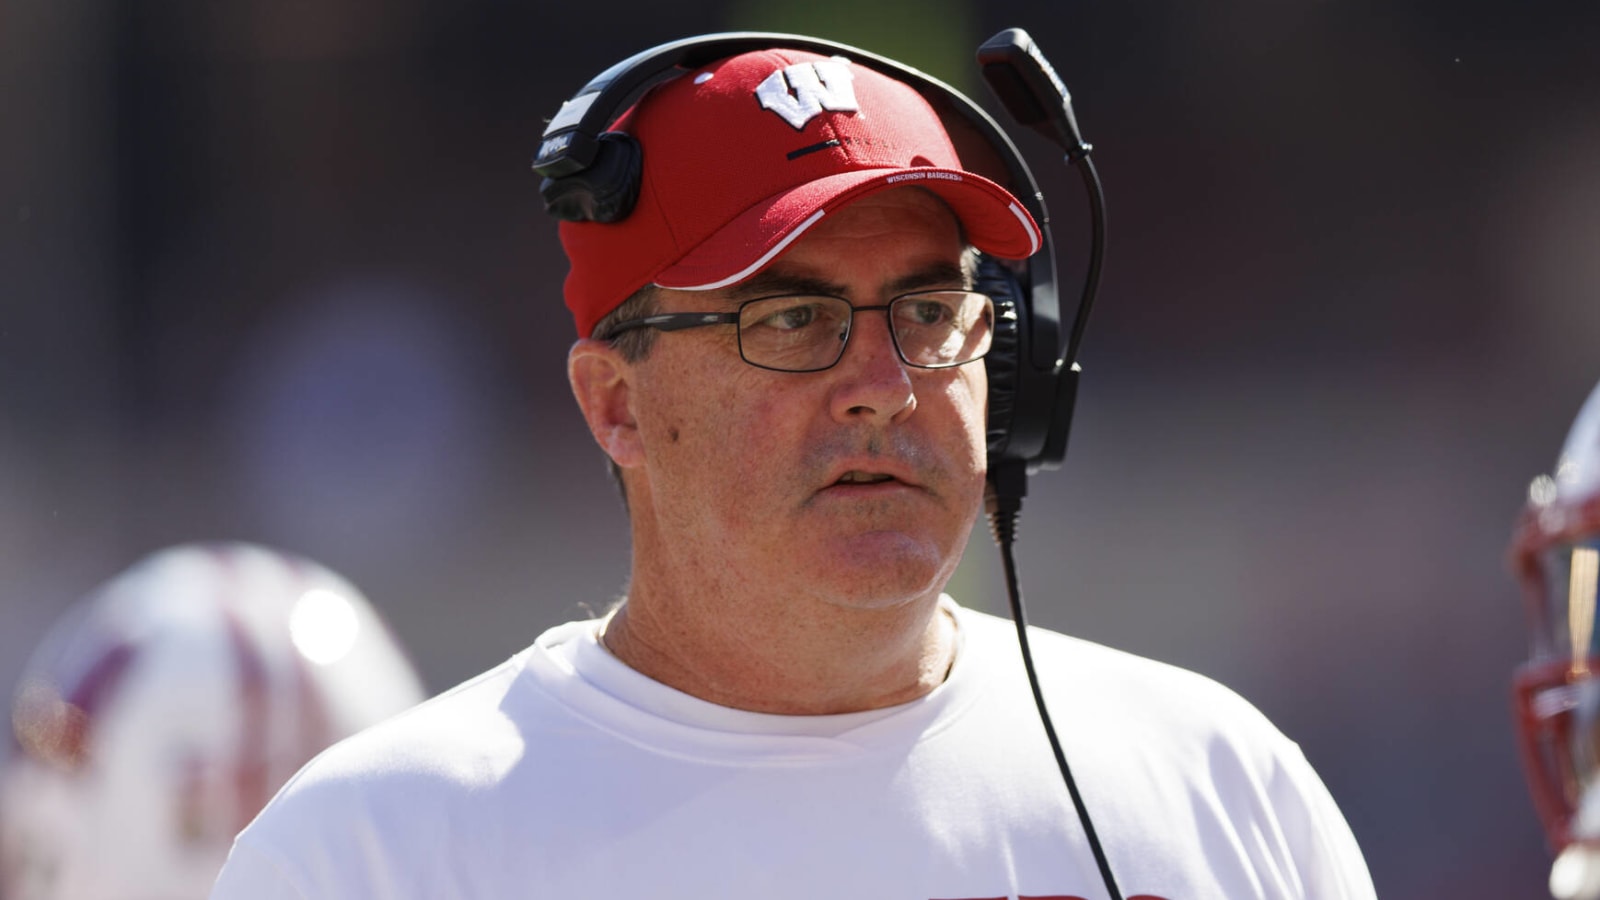 Details on Paul Chryst's buyout from Wisconsin revealed